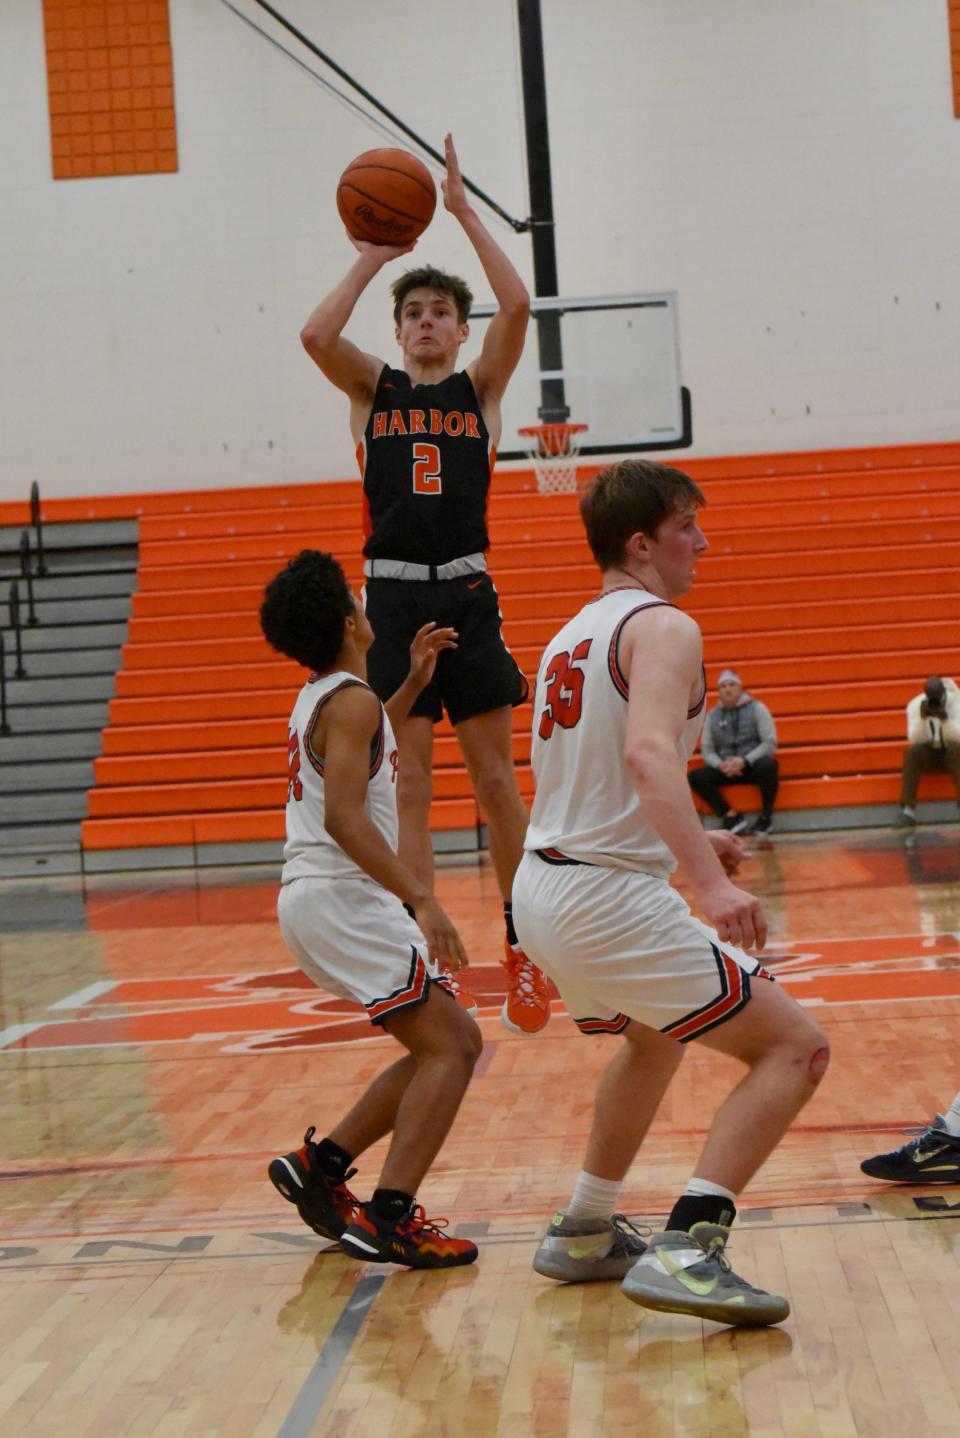 Harbor Springs' Rider Bartel shoots against Livonia Franklin during a Northville holiday showcase boys basketball game Wednesday, Dec. 28, 2022.